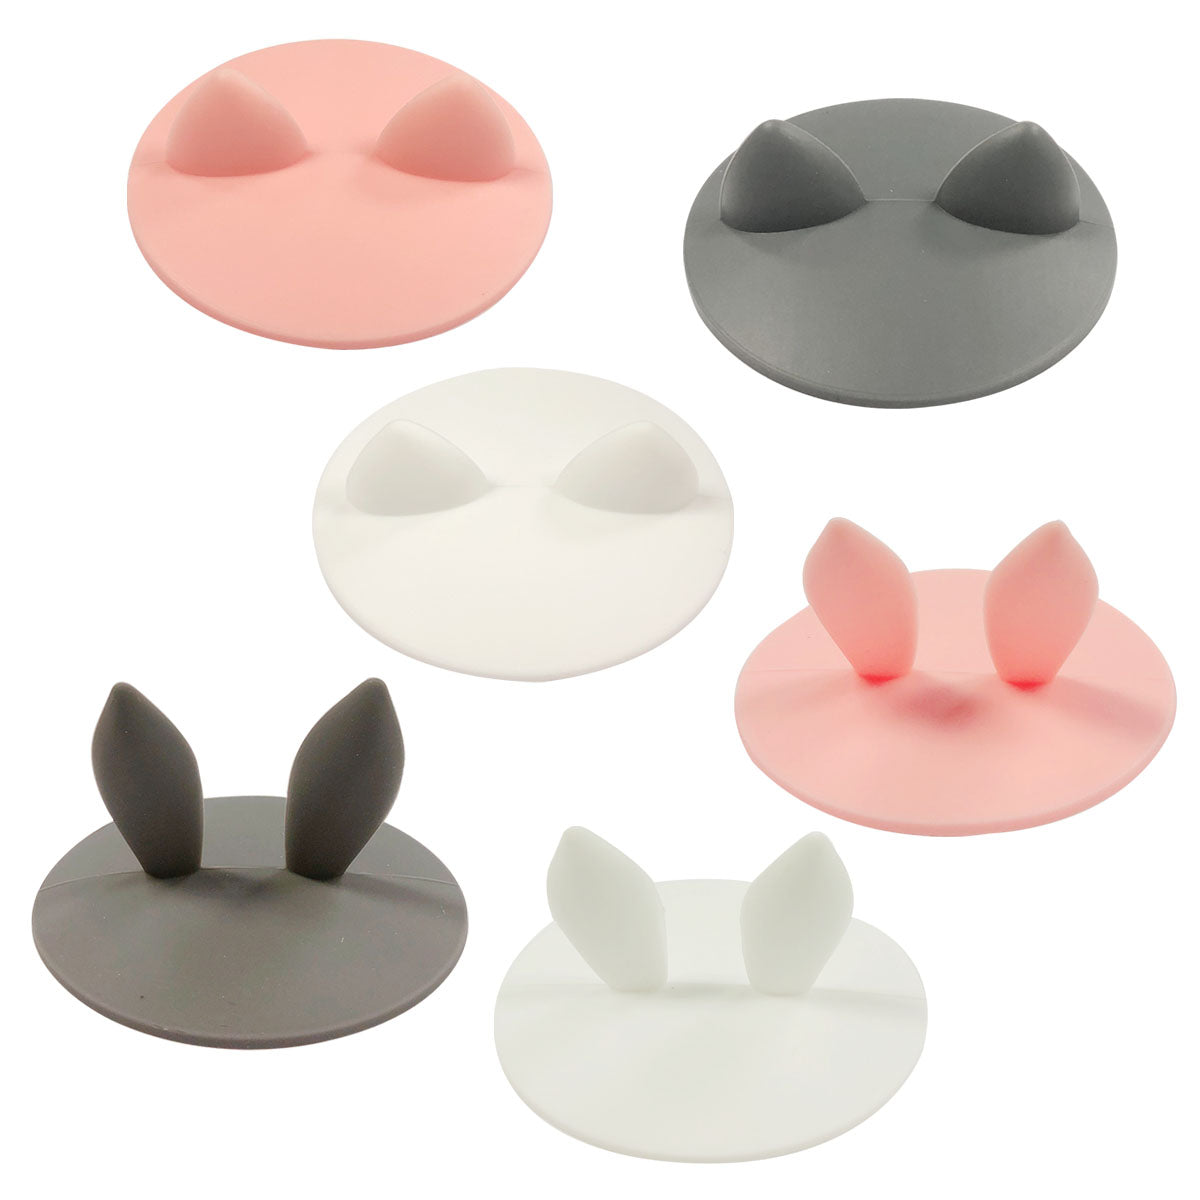 Wrapables Silicone Cup Lids, Anti-Dust Airtight Mug Covers for Hot and Cold Beverages (Set of 6) Rabbit Ears